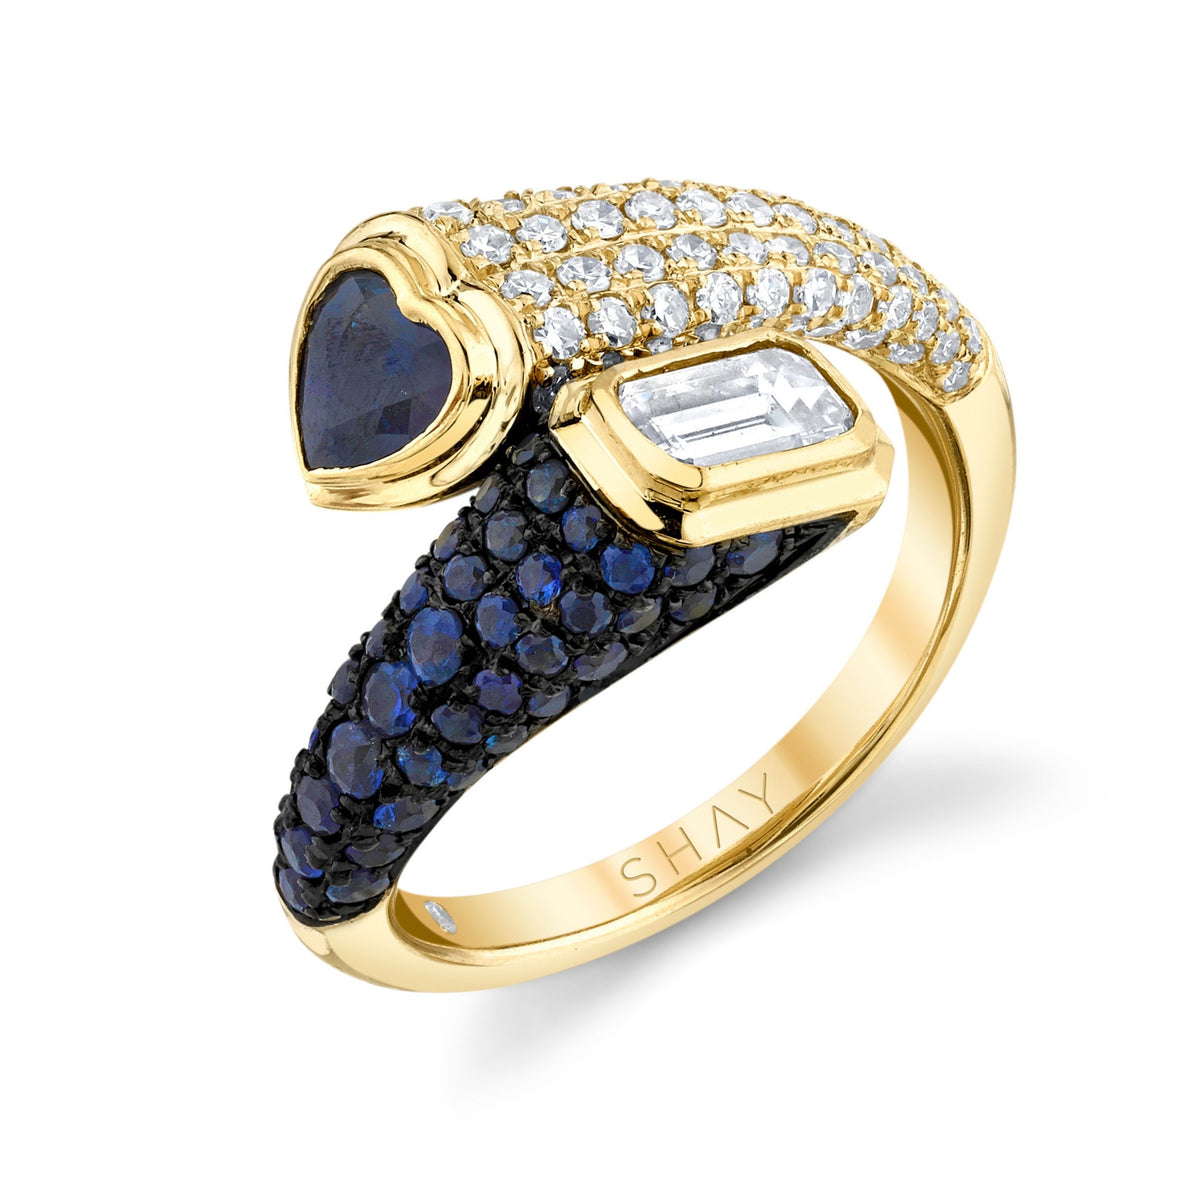 READY TO SHIP DIAMOND & BLUE SAPPHIRE MIXED BYPASS PINKY RING